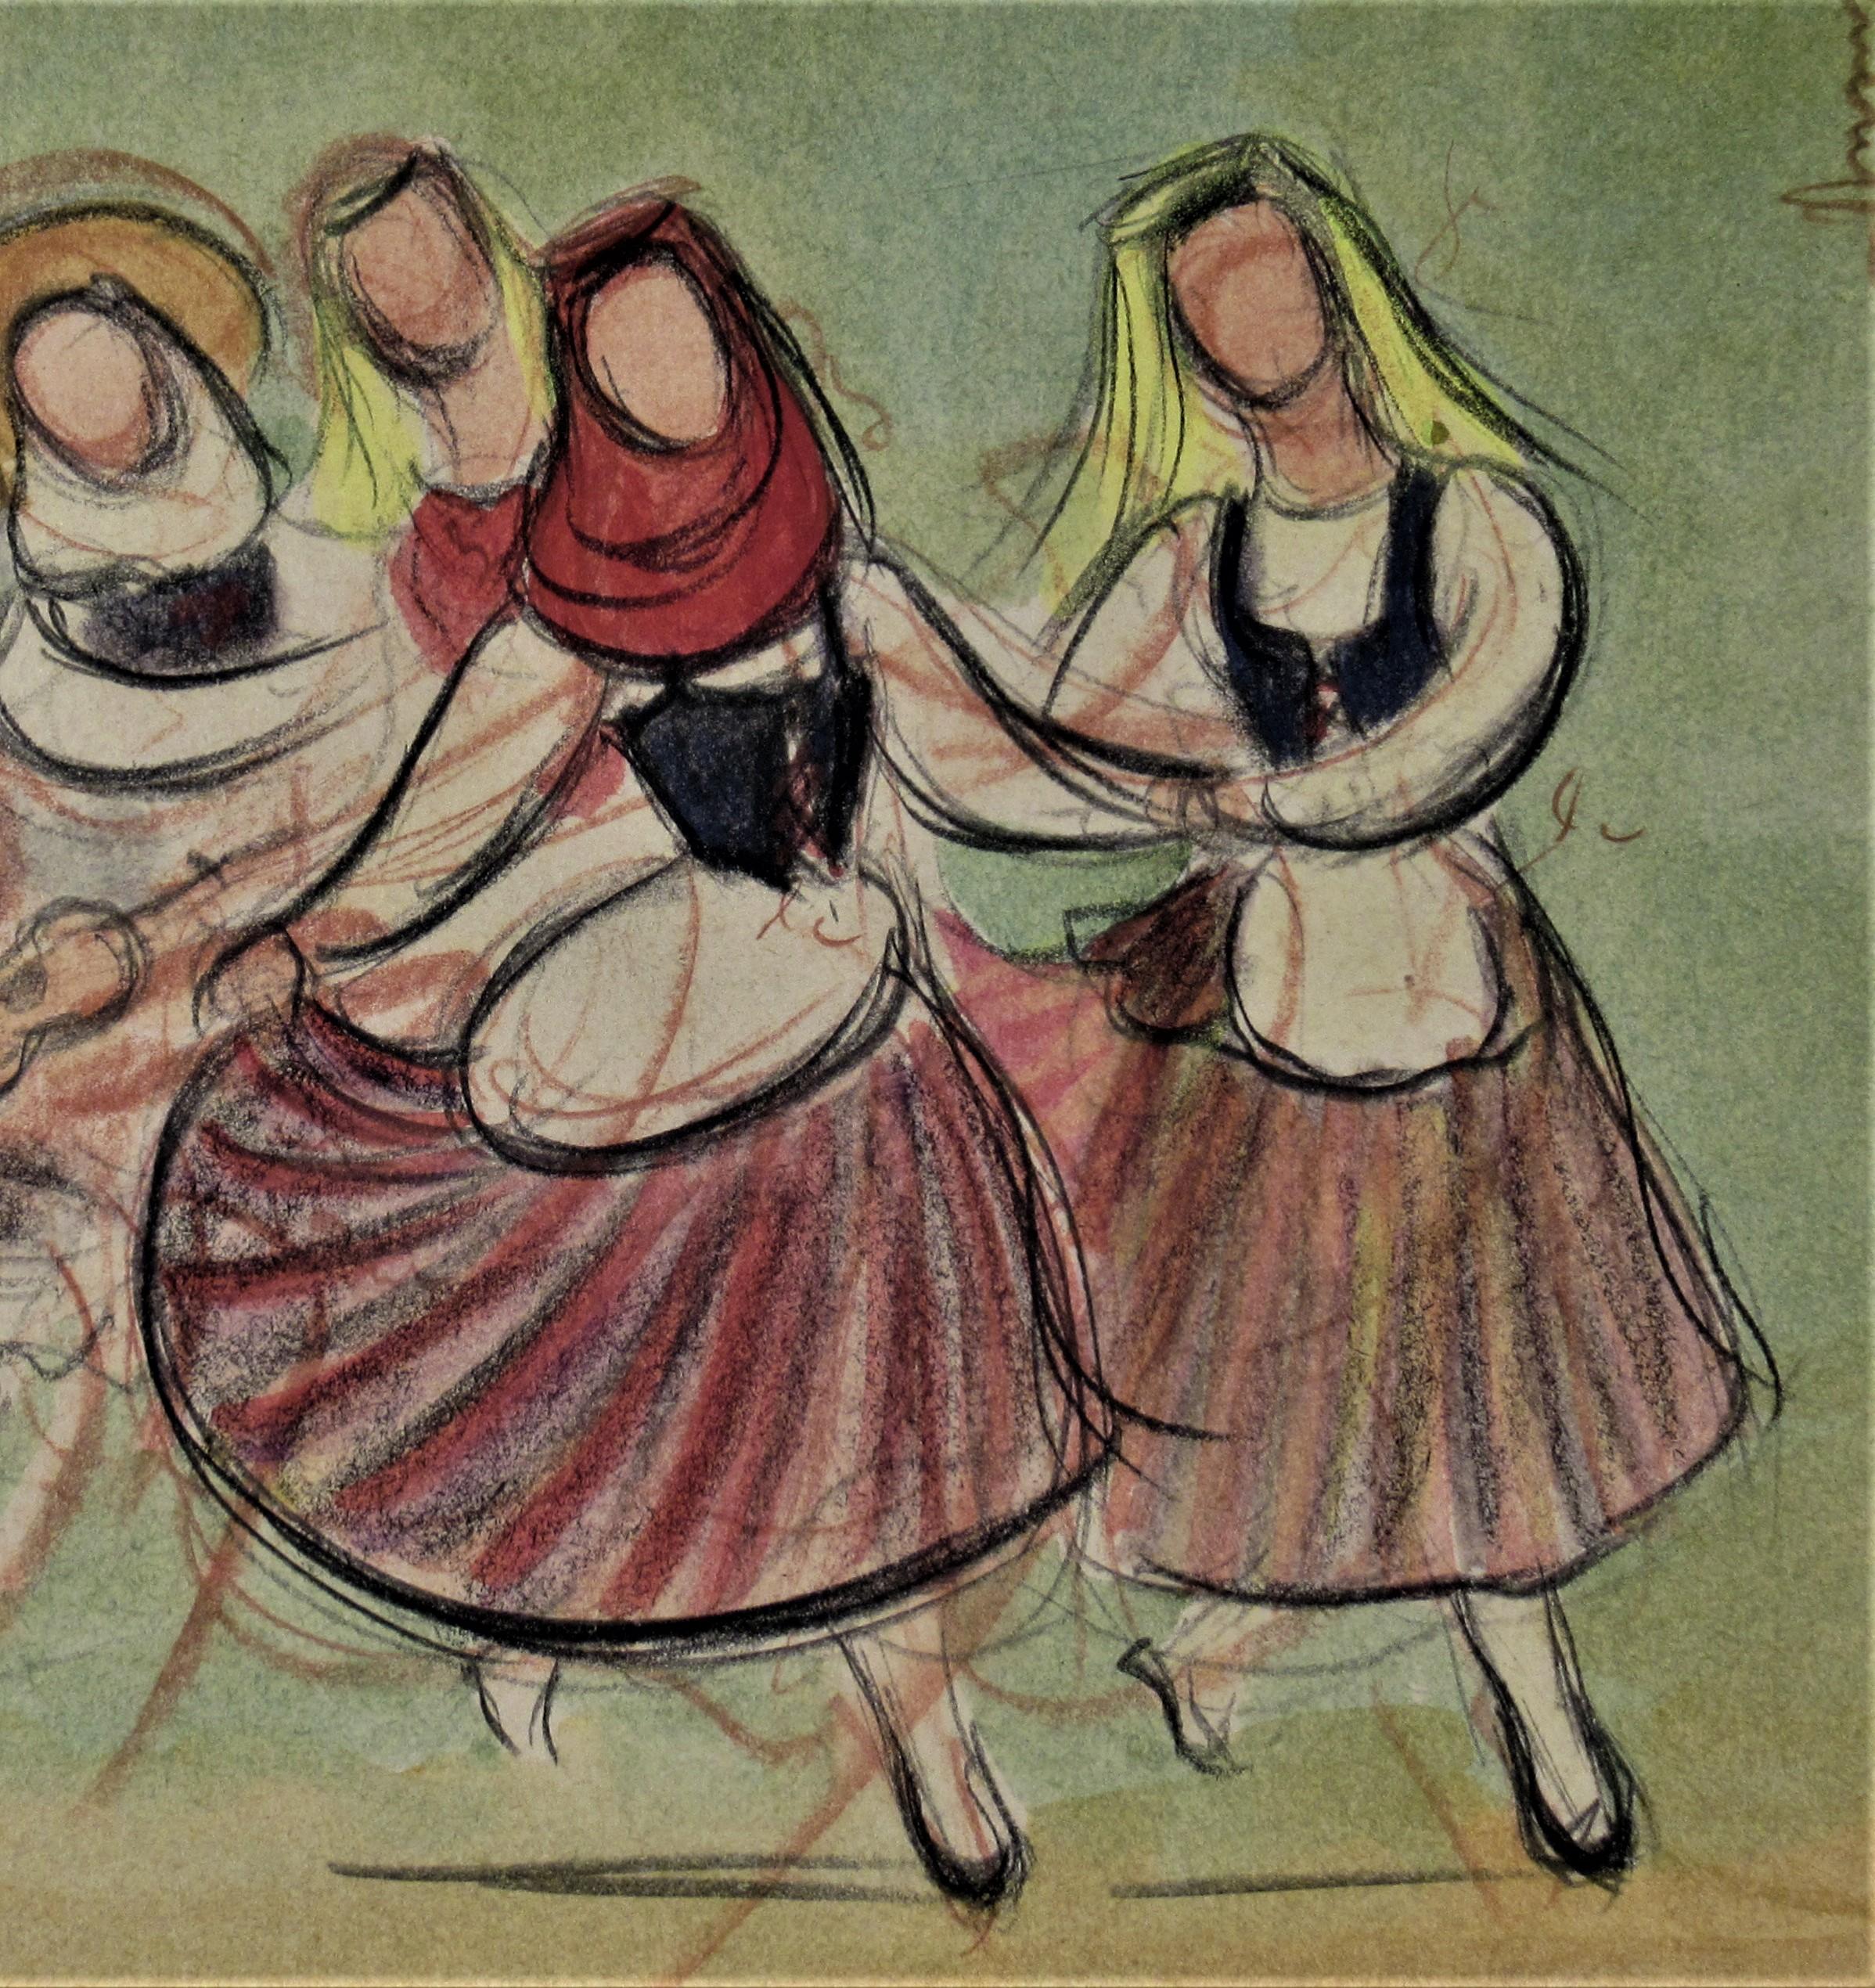 Danse populaire des Isles Canaries (Dance Popular from the Canaries Islands)  - Art by Jean Target